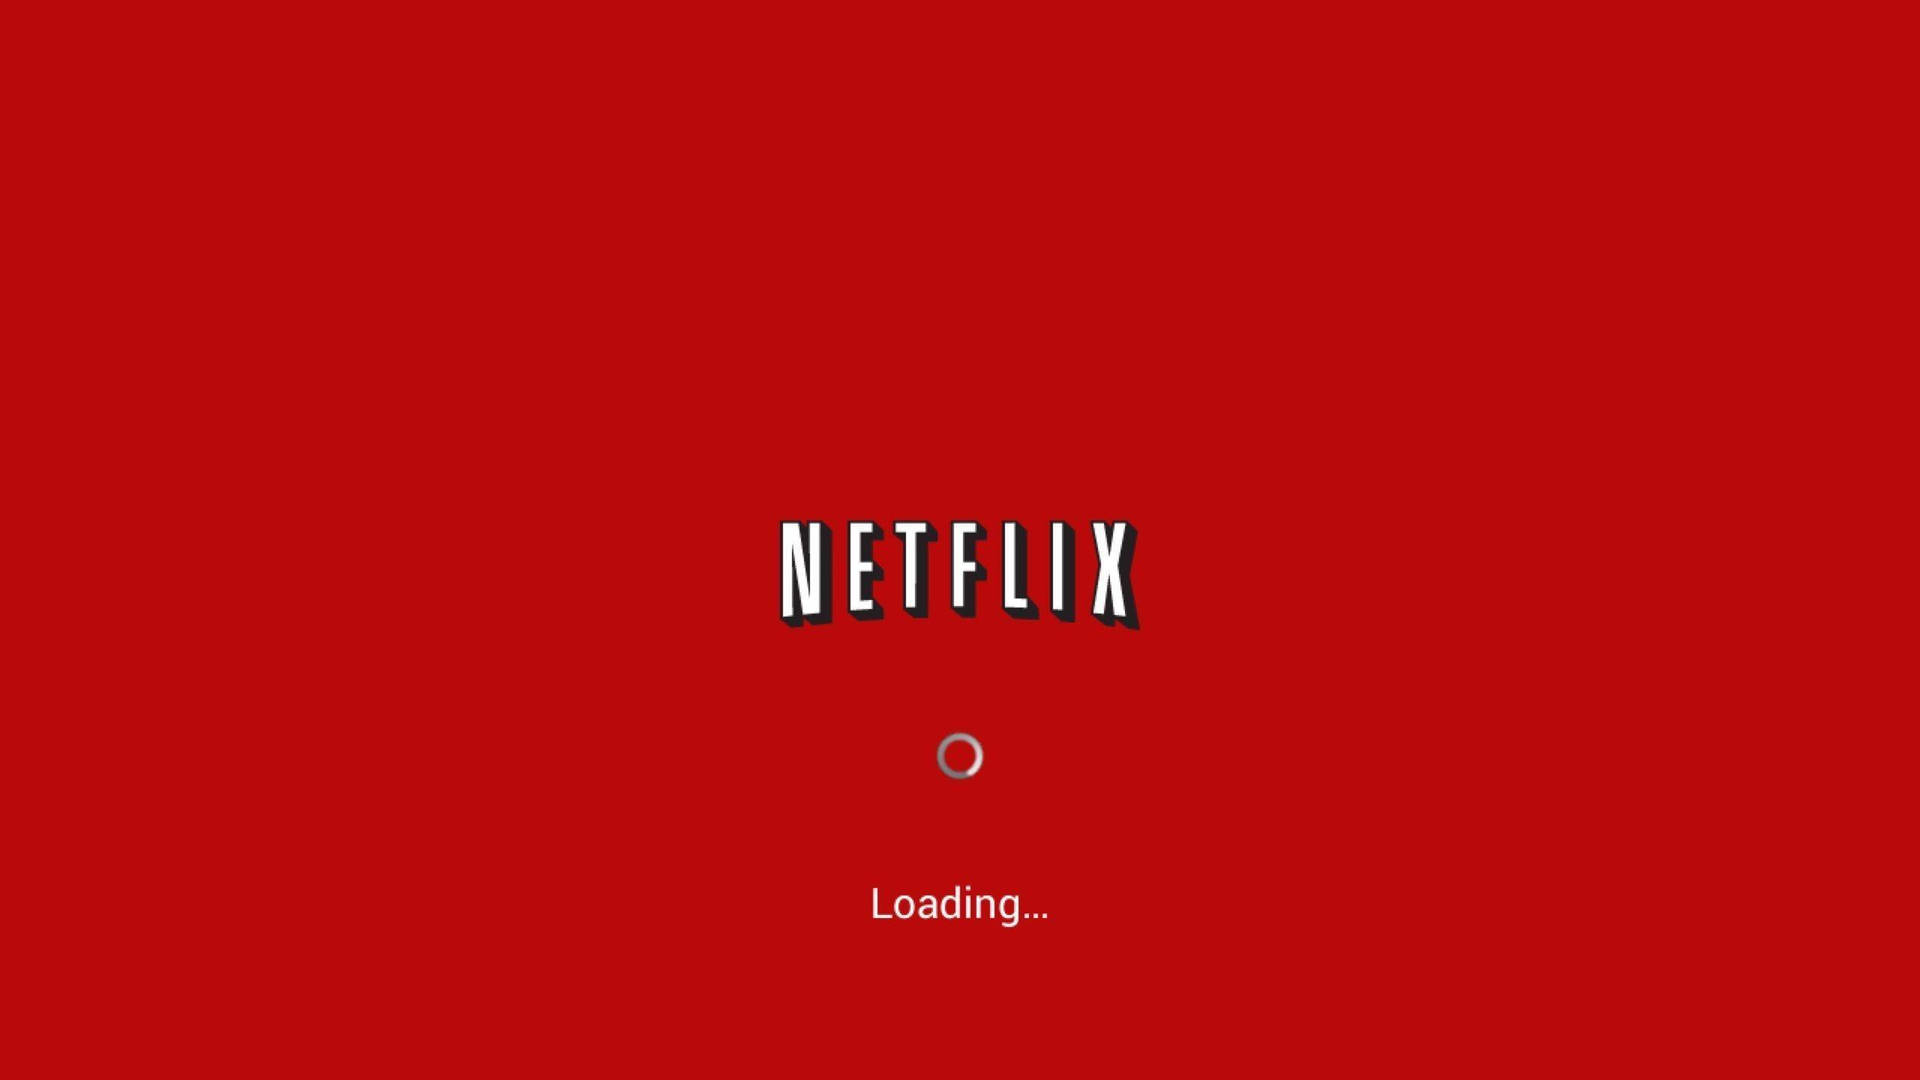 Netflix 2560X1440 Wallpaper and Background Image